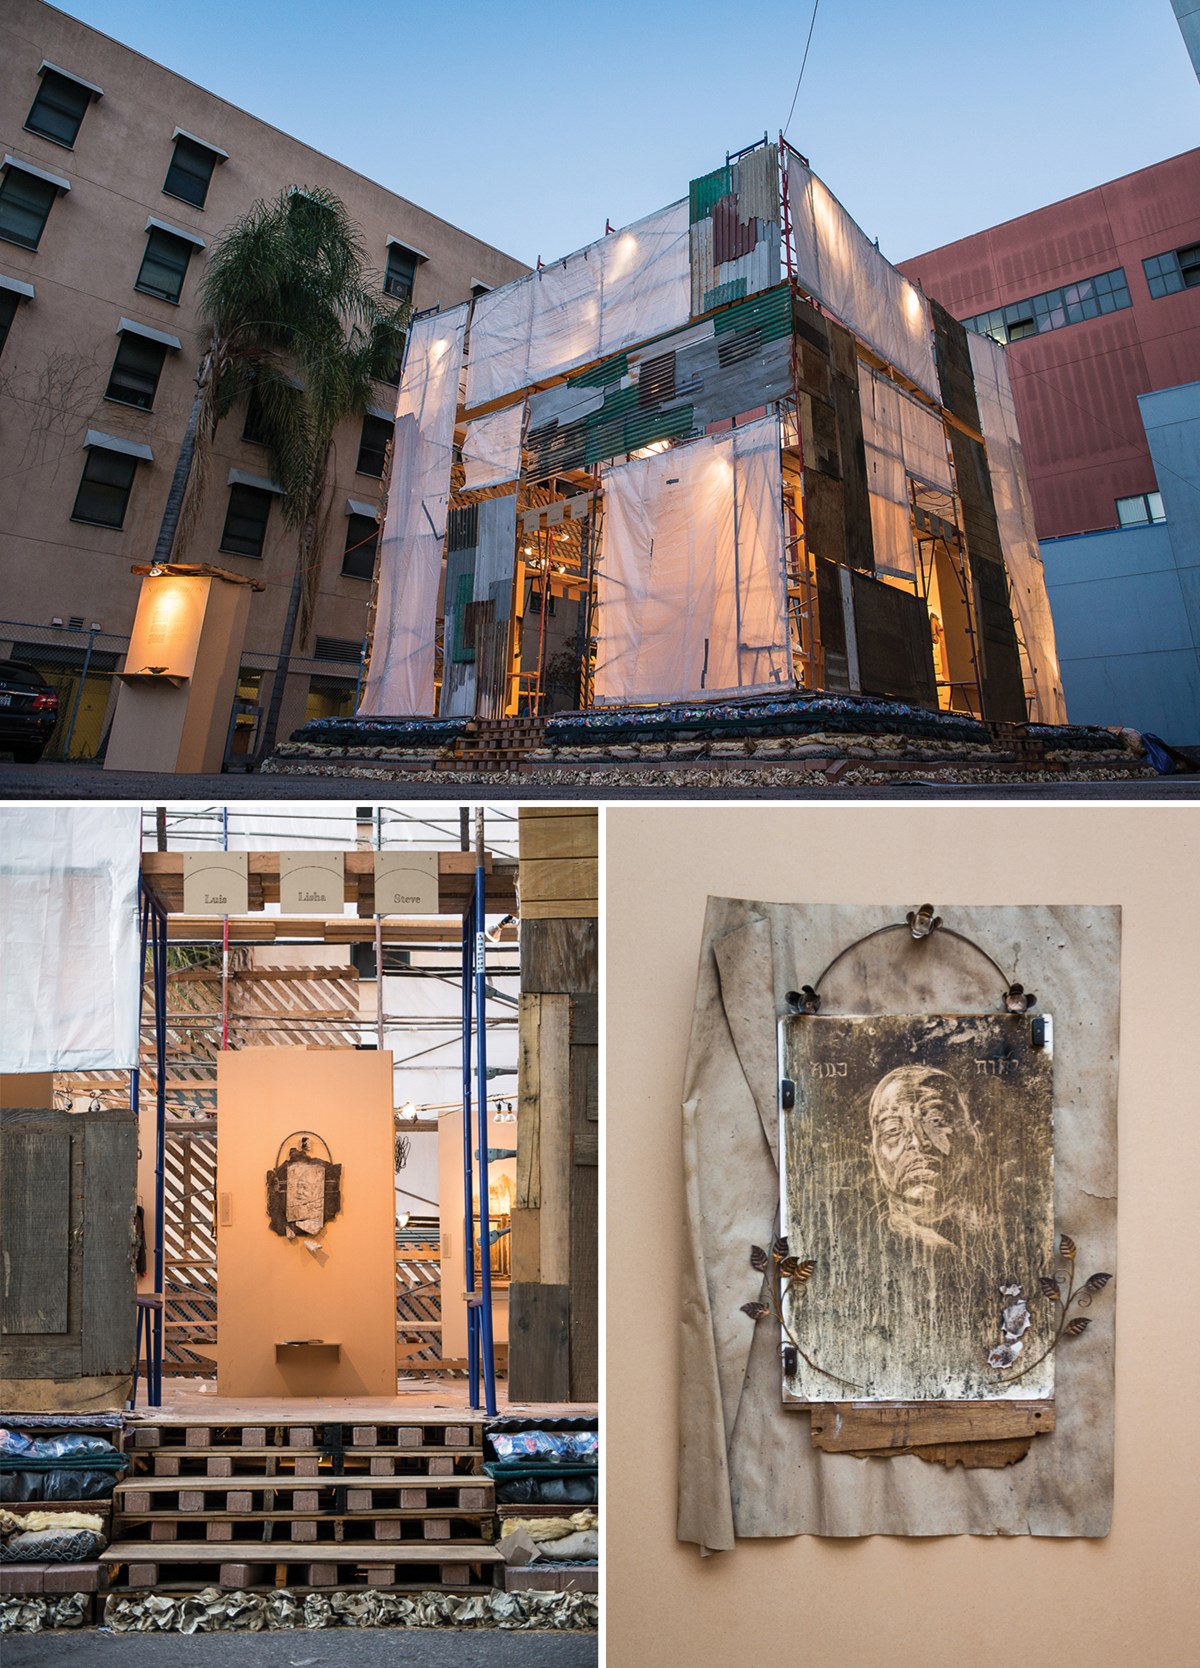 Sacred Streets: This display featured 12 portraits of individuals the artist met on Skid Row in Los Angeles, drawn and etched with saint-like symbolism on reclaimed found objects. These portraits were housed in a temporary structure built by artists using discarded street materials. This temporary structure stands as a symbol of the beautiful collision of sacred and earthly. By recognizing and arranging humble earthly objects in these specific dimensions, they represent a space of hallowed consecration.